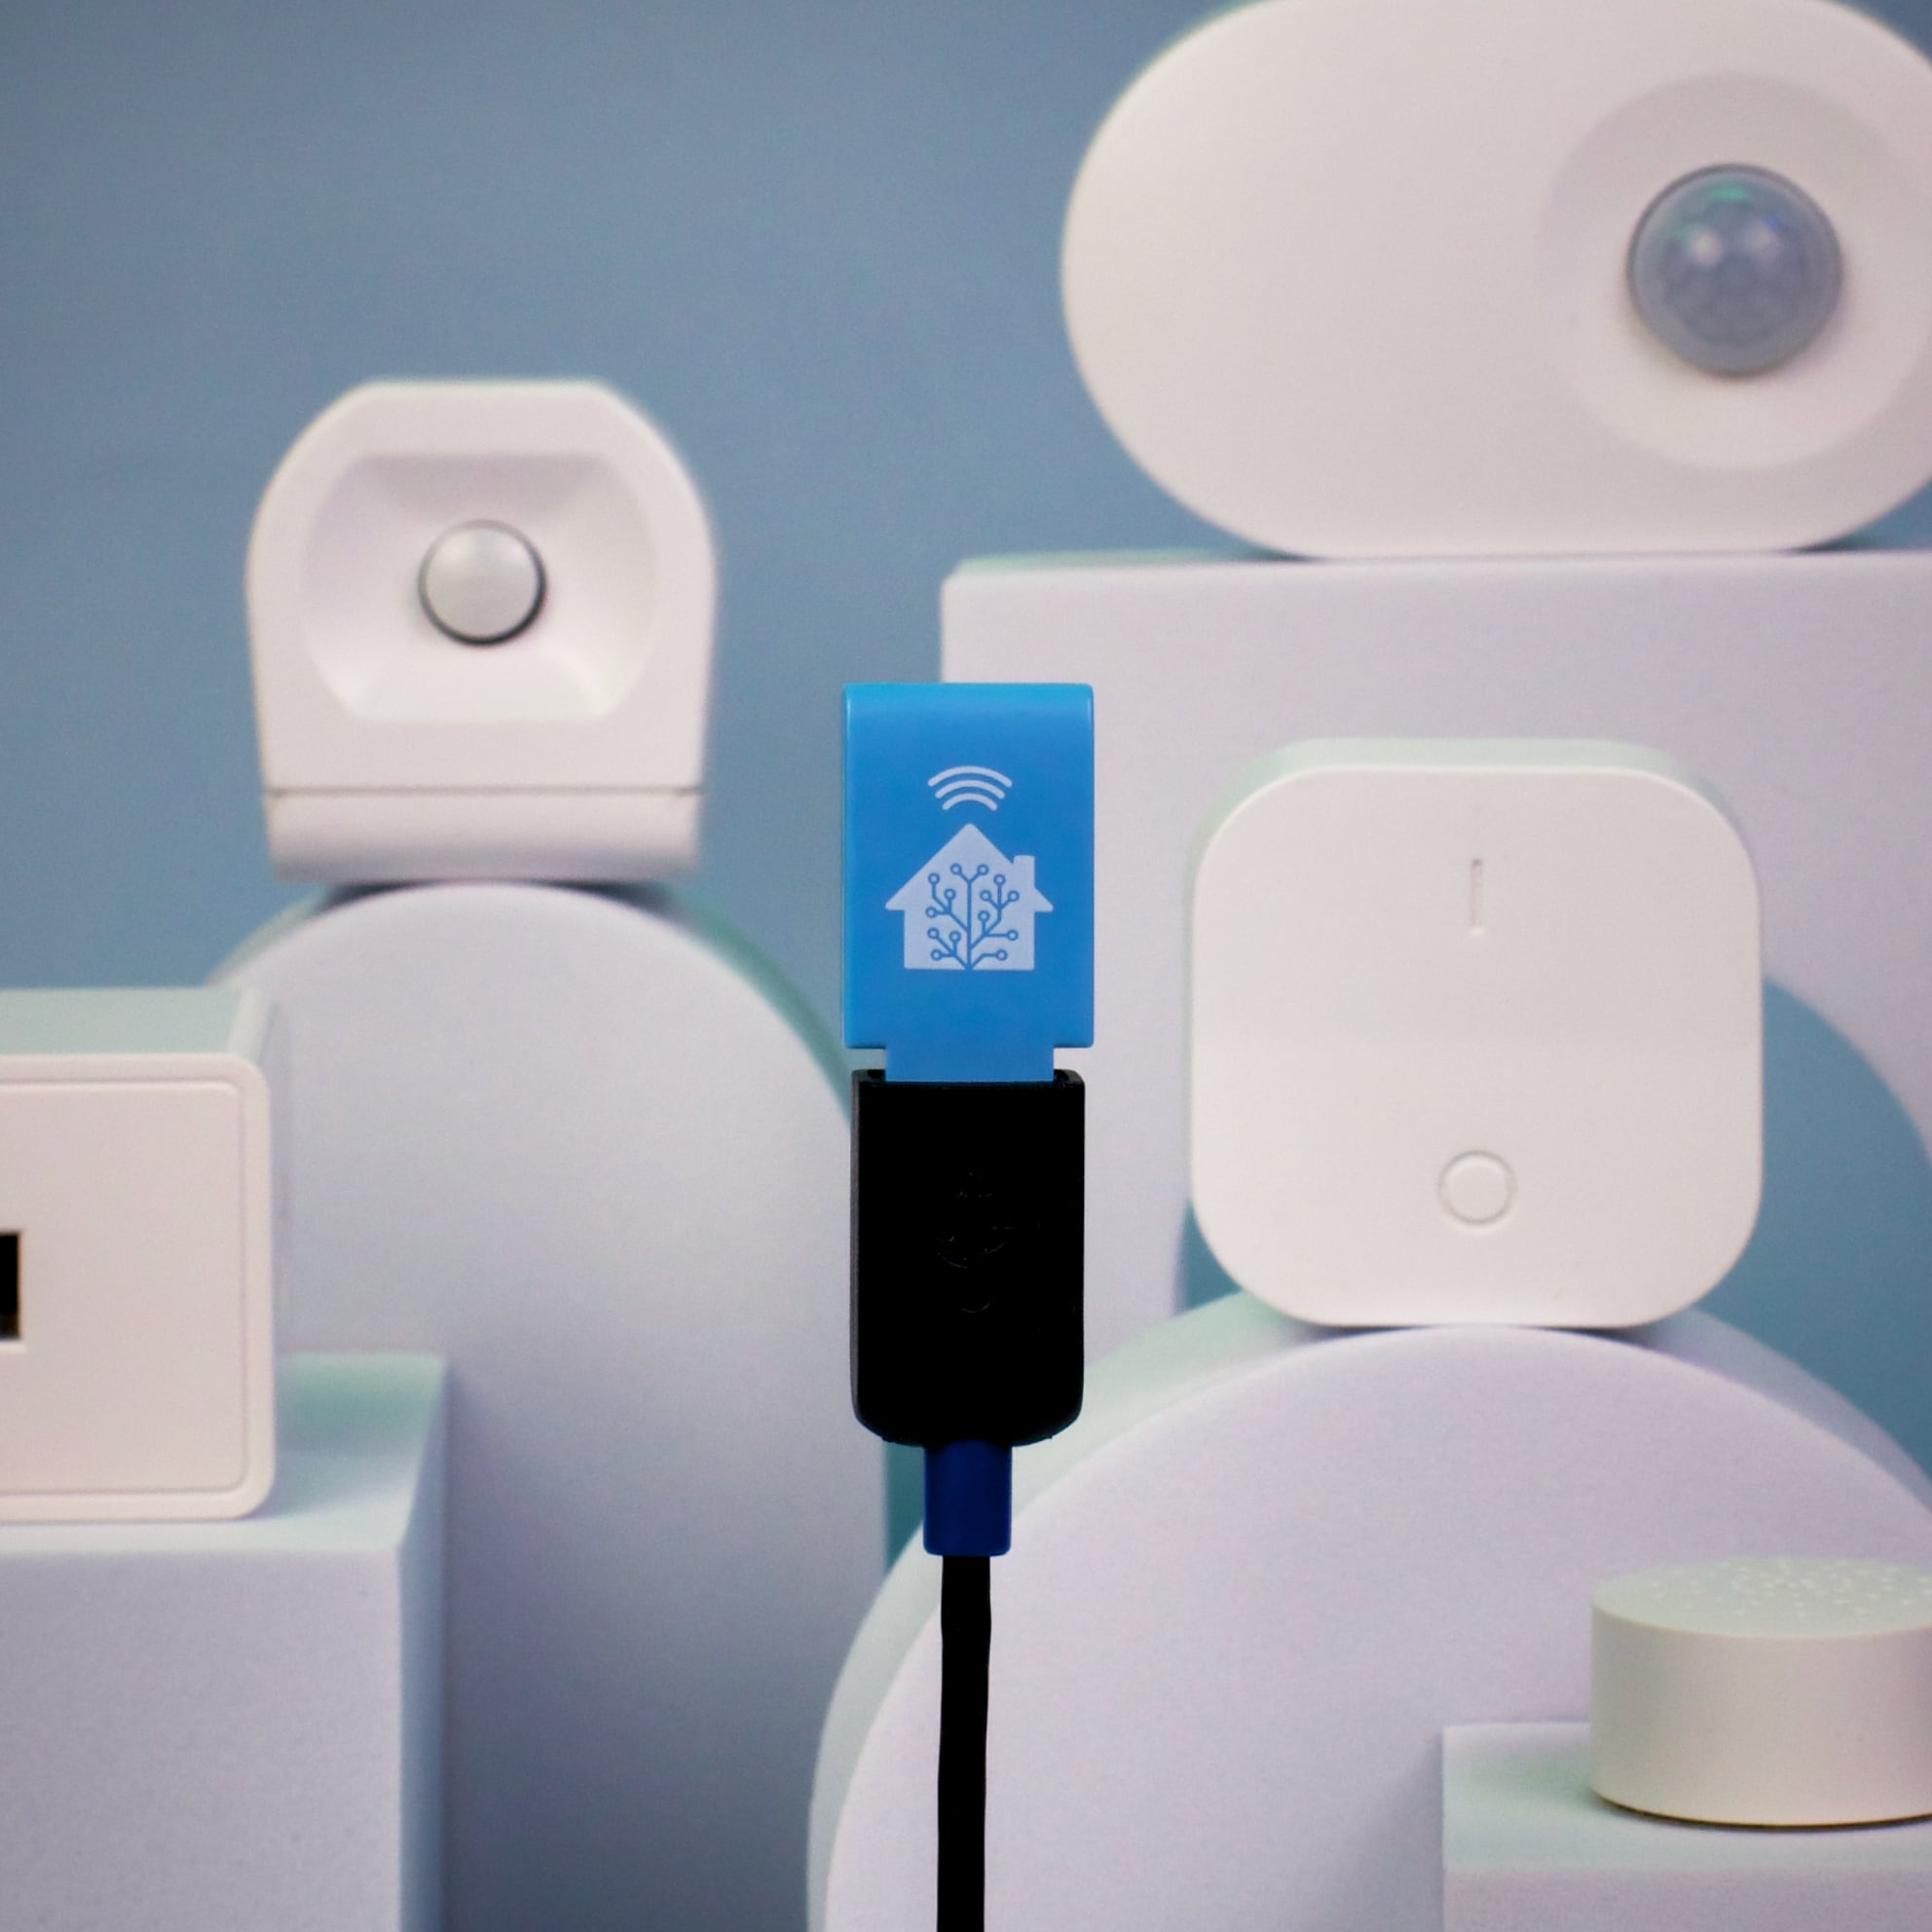 Home Assistant Green: Die Plug and Play Smart Home Zentrale